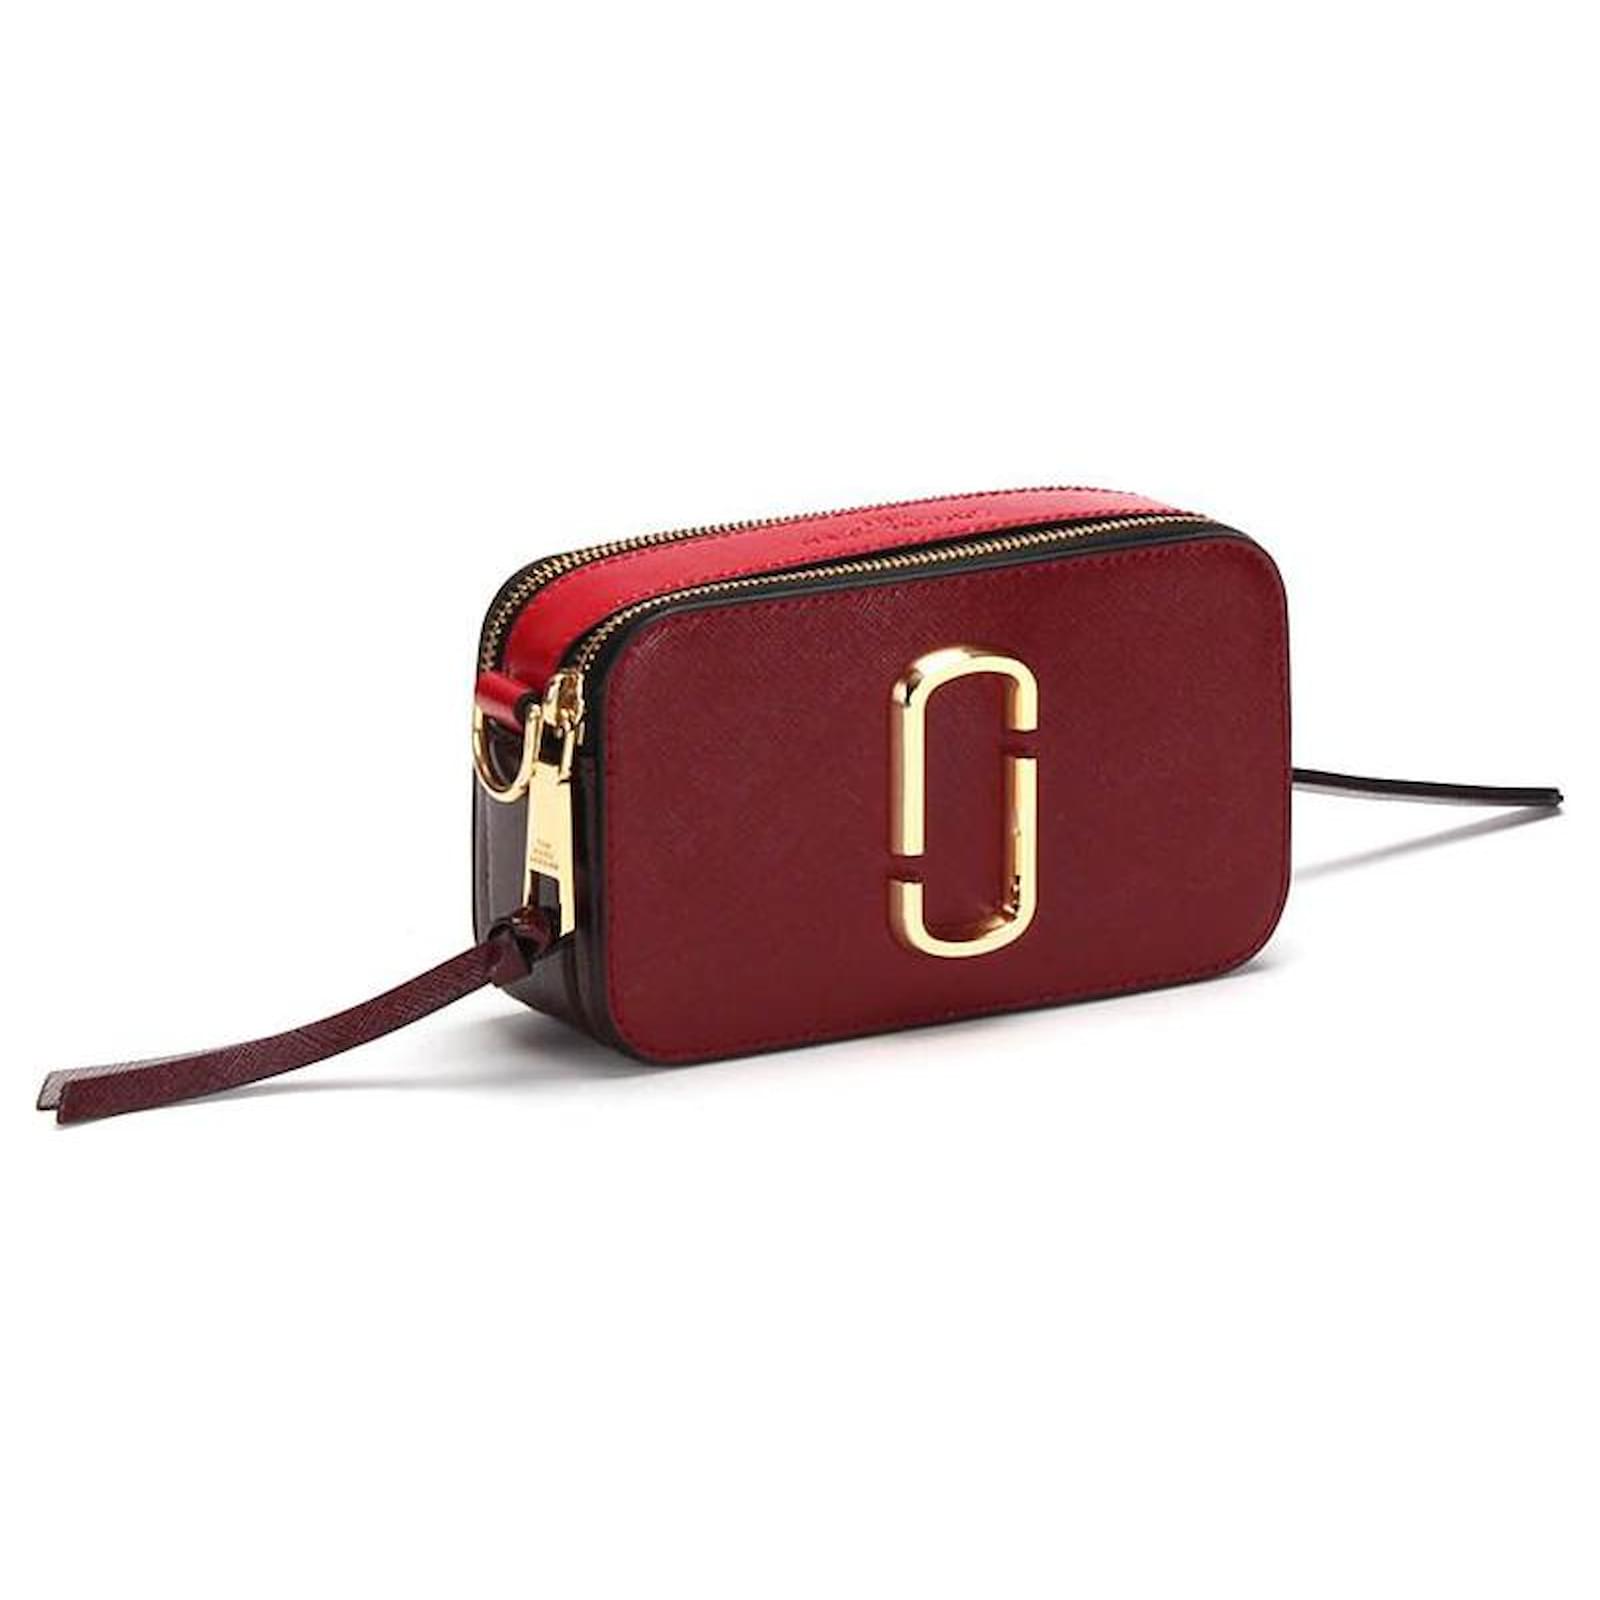 Snapshot leather crossbody bag Marc Jacobs Red in Leather - 36504309